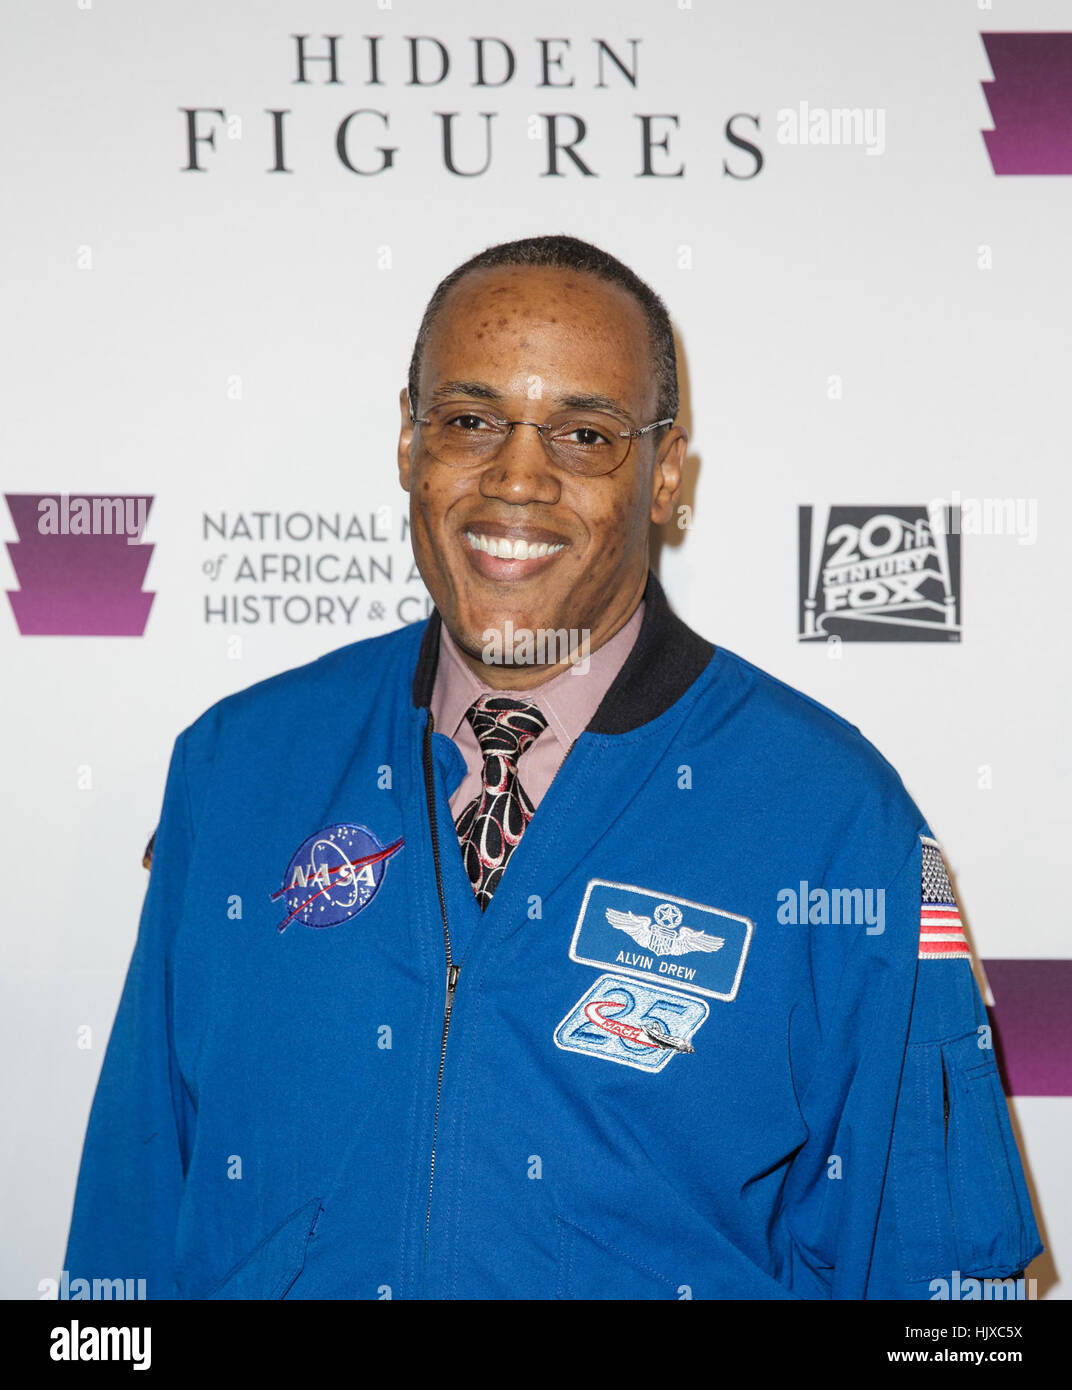 NASA astronaut Alvin Drew arrives on the red carpet for a screening of the film “Hidden Figures” at the Smithsonian’s National Museum of African American History and Culture, Wednesday, Dec. 14, 2016 in Washington DC. The film is based on the book of the same title, by Margot Lee Shetterly, and chronicles the lives of Katherine Johnson, Dorothy Vaughan and Mary Jackson -- African-American women working at NASA as “human computers,” who were critical to the success of John Glenn’s Friendship 7 mission in 1962. Stock Photo